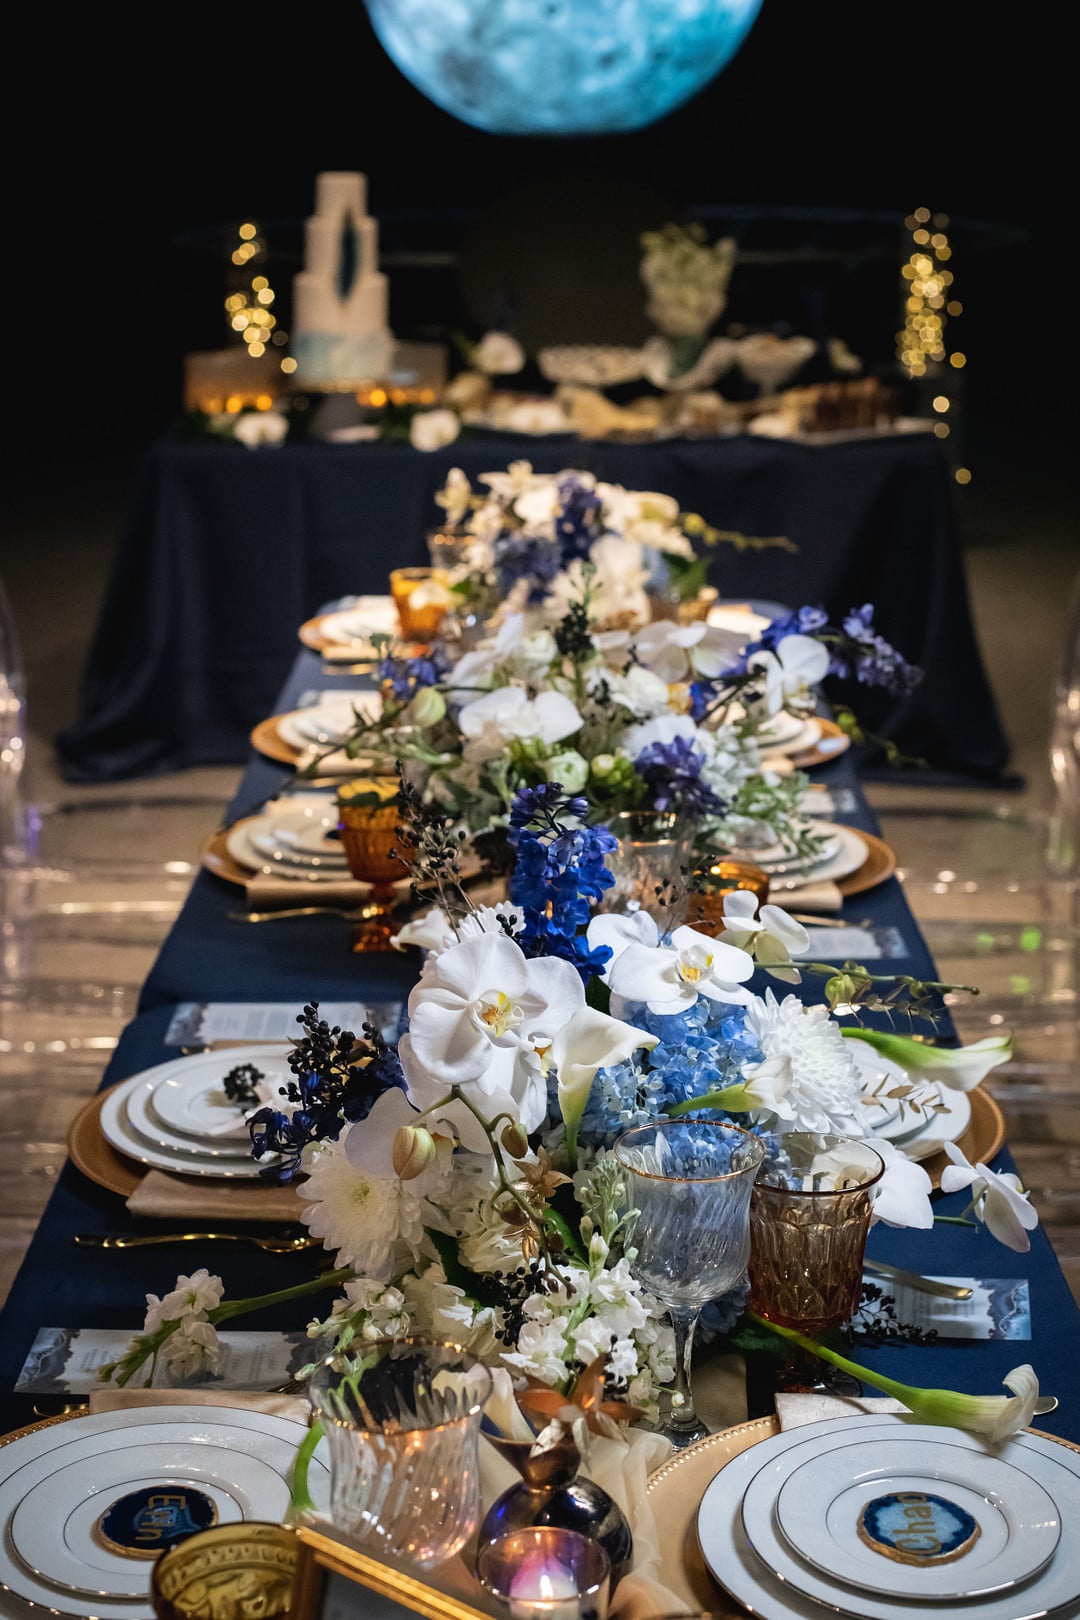 the table set up with lots of blue and white flowers surrounding the fine china